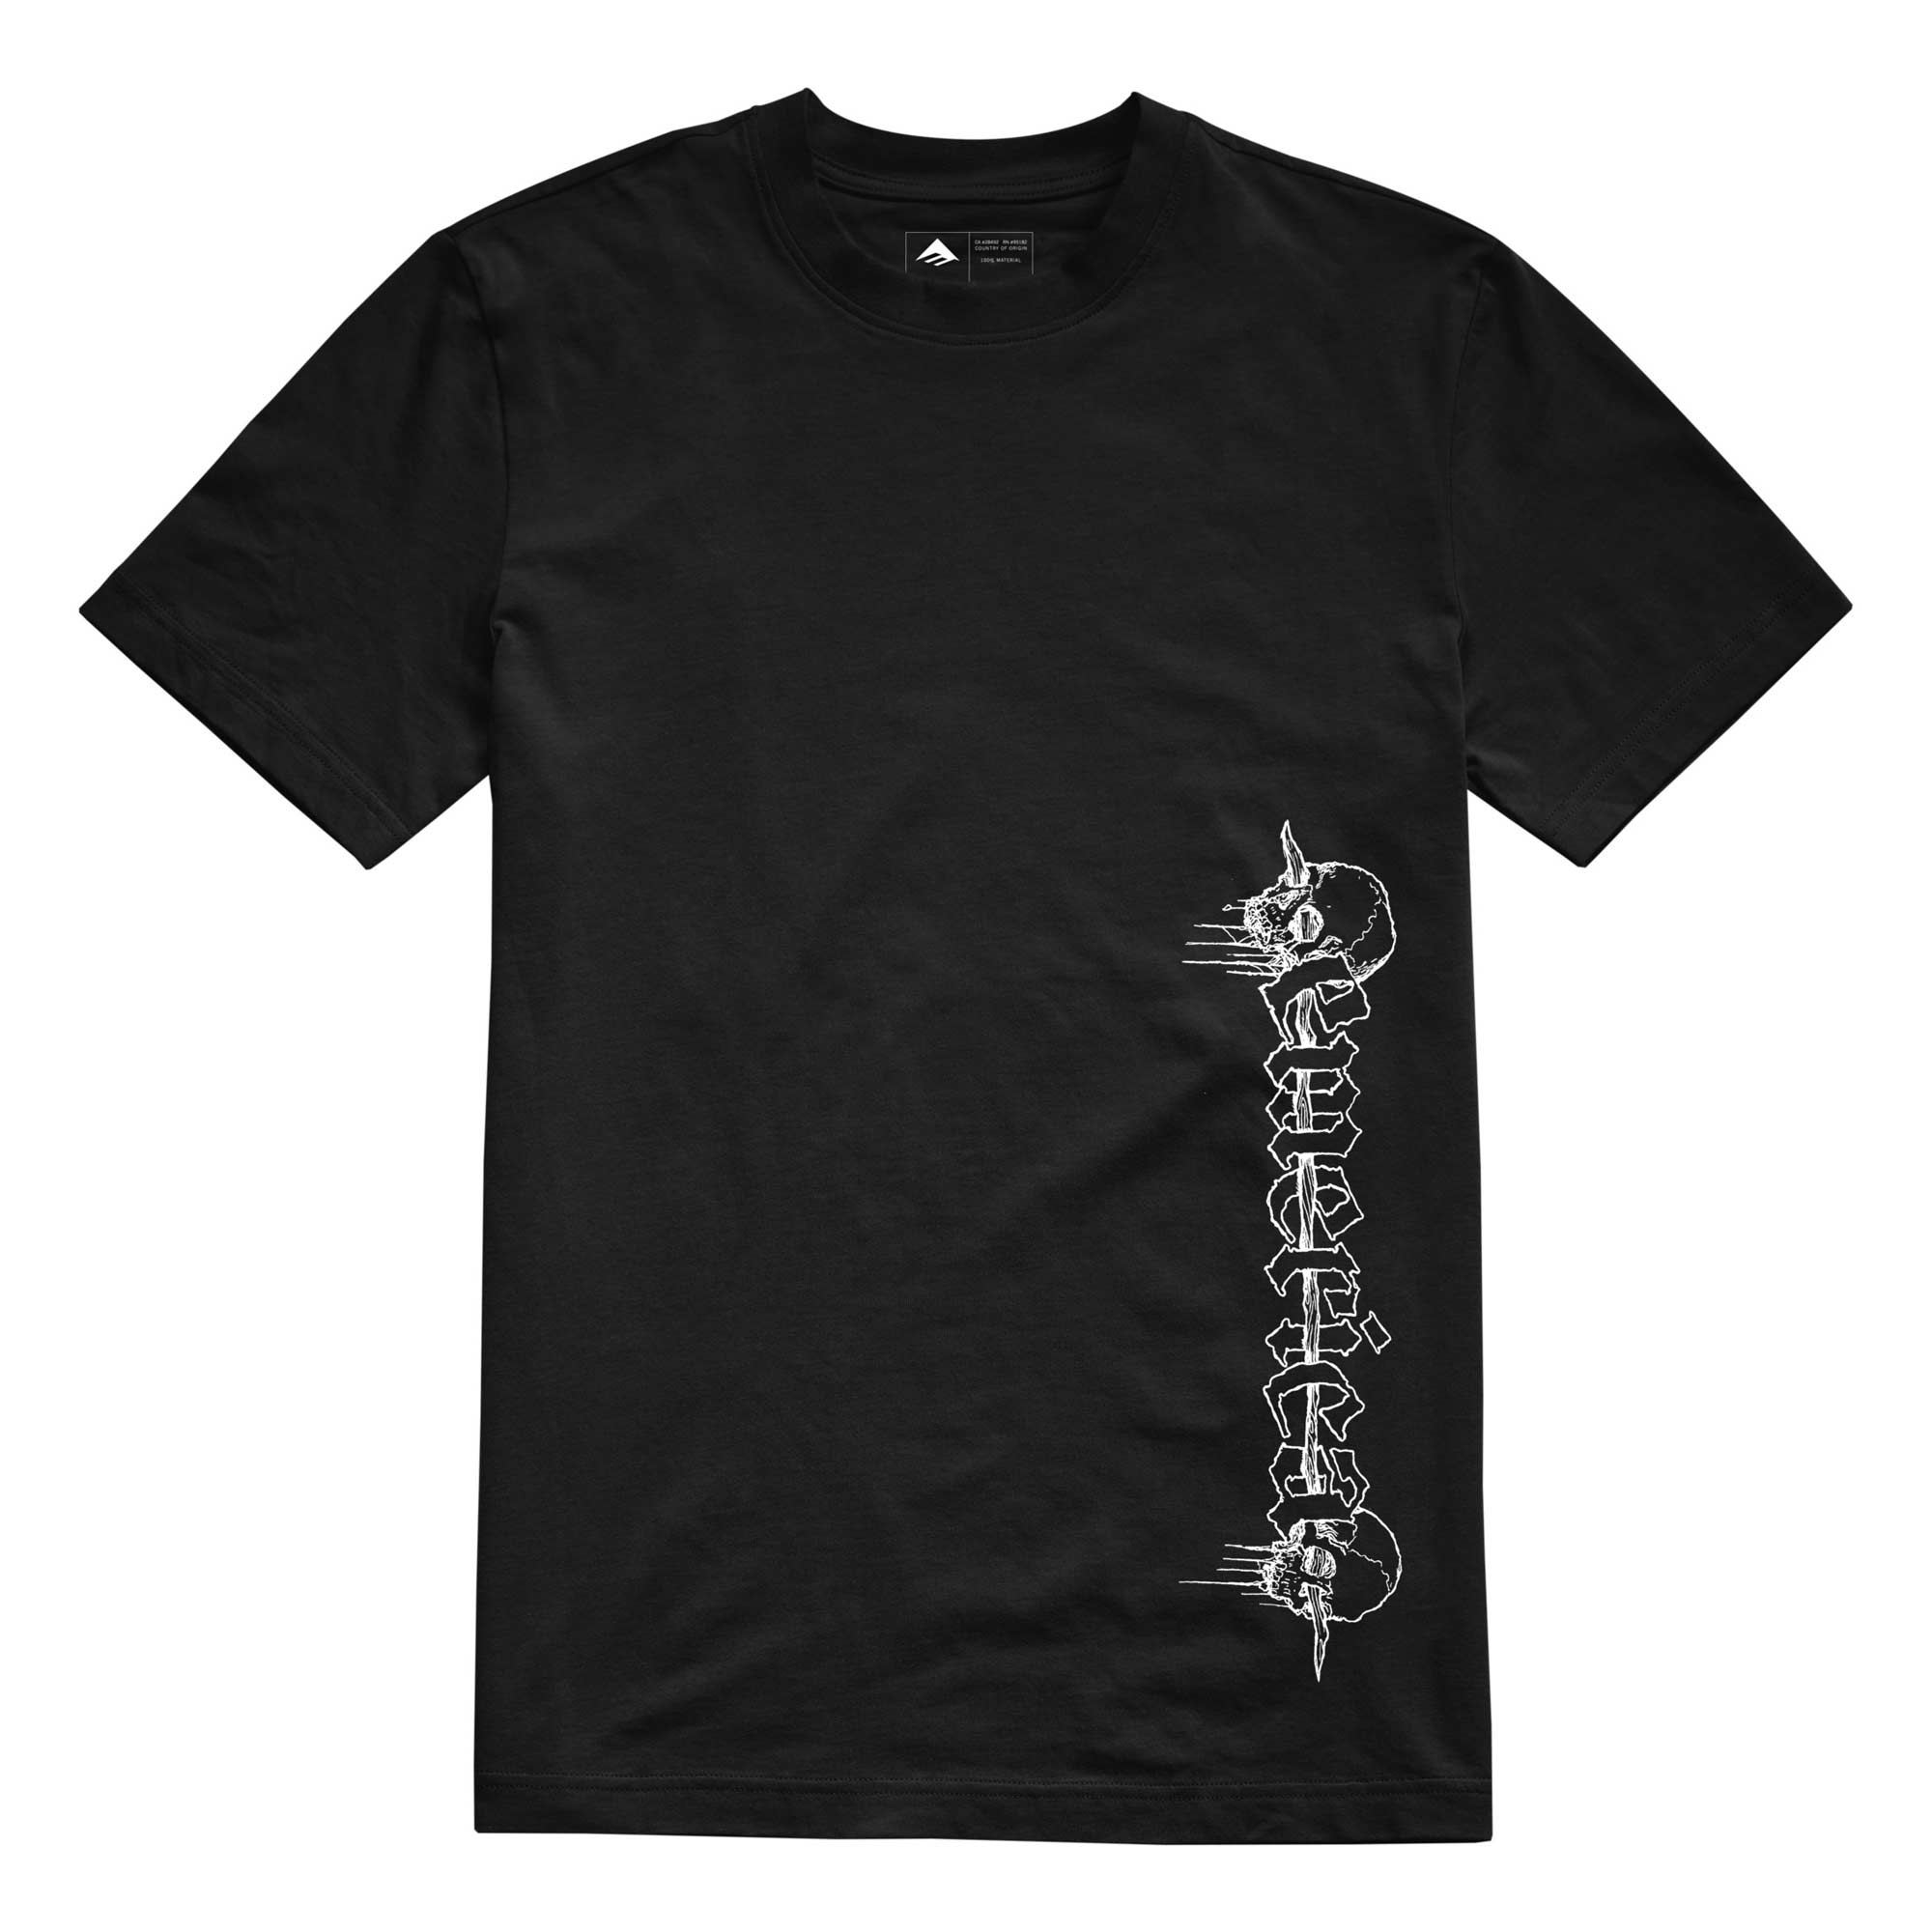 EMERICA T-Shirt SPIKED S/S, black